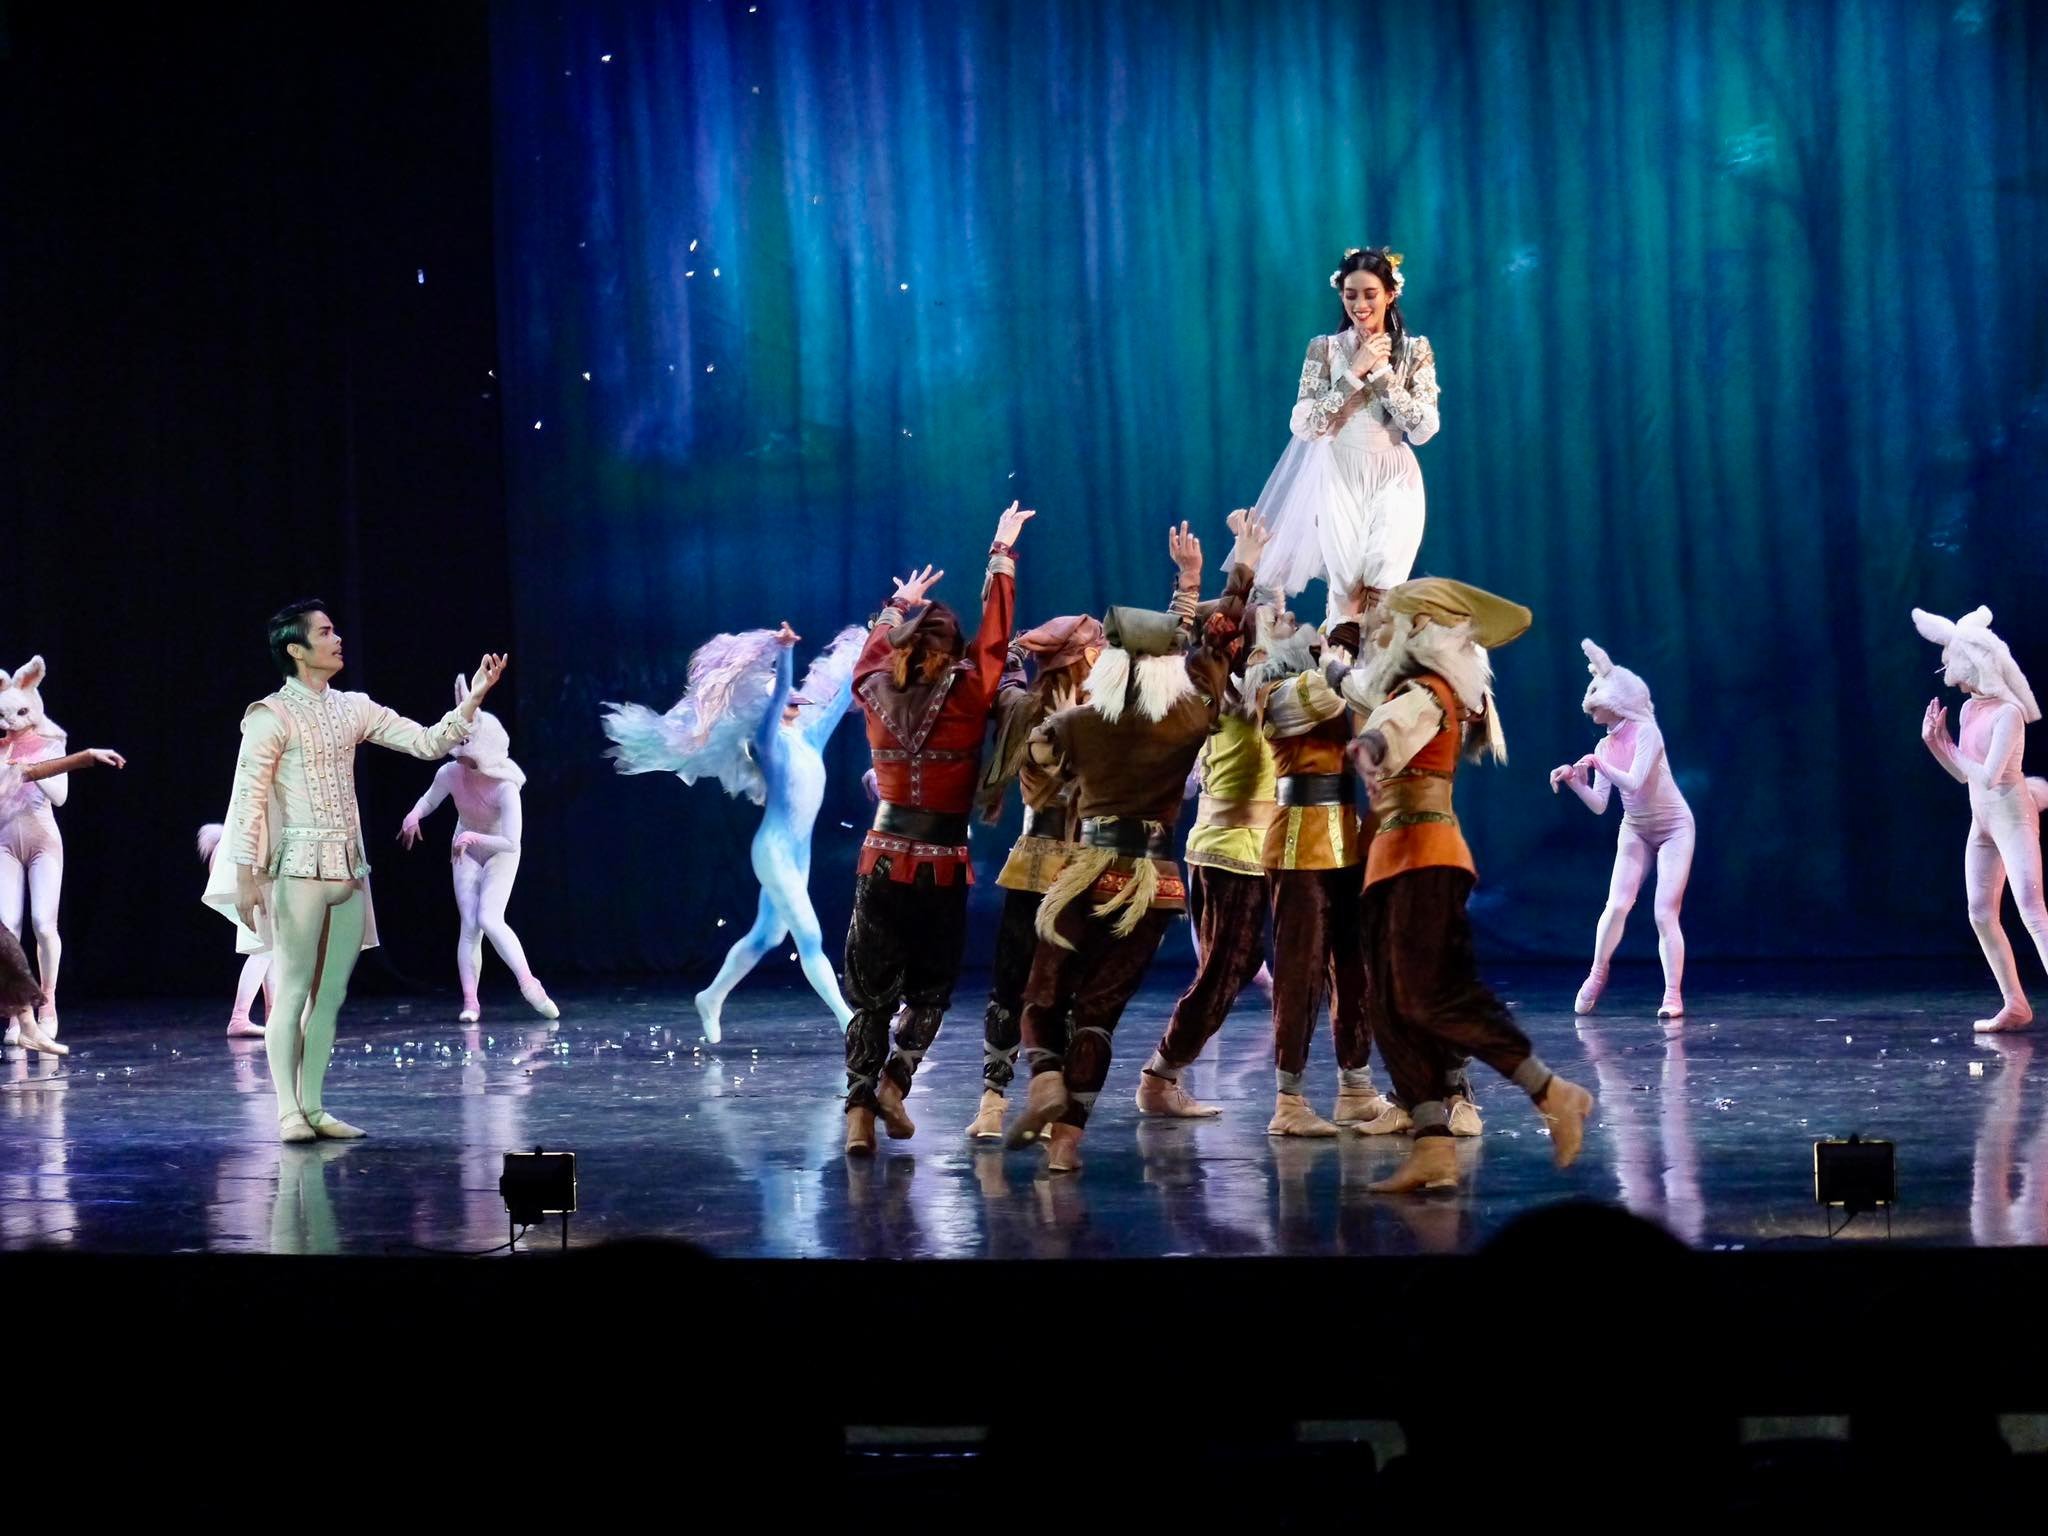    After eating a poisoned apple, the fallen Snow White (Joan Emery Sia) is thought to be dead in Lisa Macuja-Elizalde’s  Snow White  (2019). But true to the fairytale the ballet is based on, a kiss from the love-struck Prince (Elpidio Magat Jr.) rev